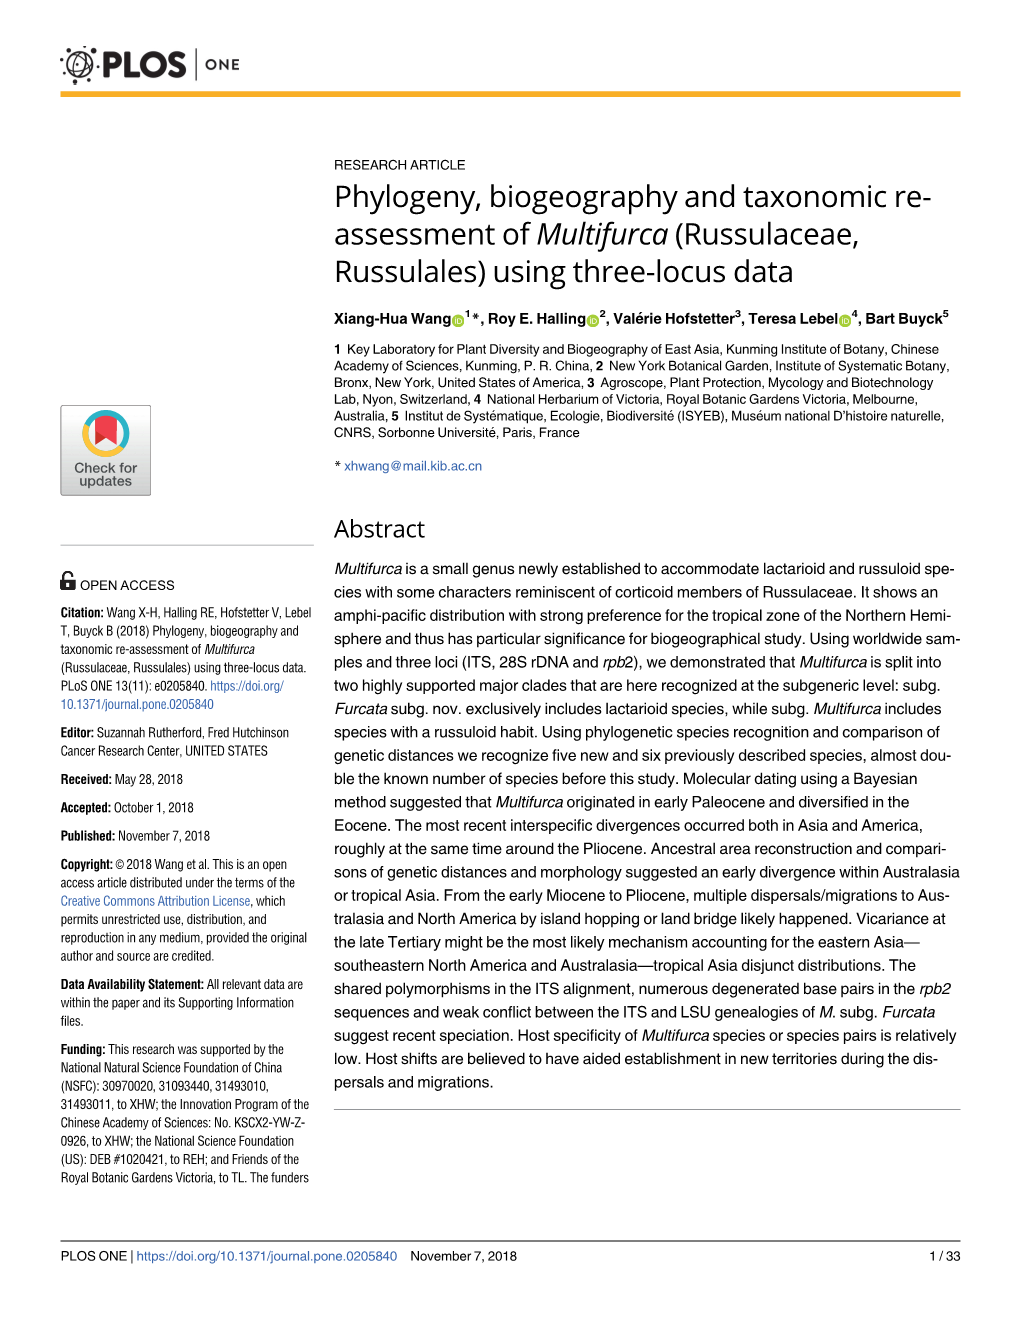 Phylogeny, Biogeography and Taxonomic Re- Assessment of Multifurca (Russulaceae, Russulales) Using Three-Locus Data